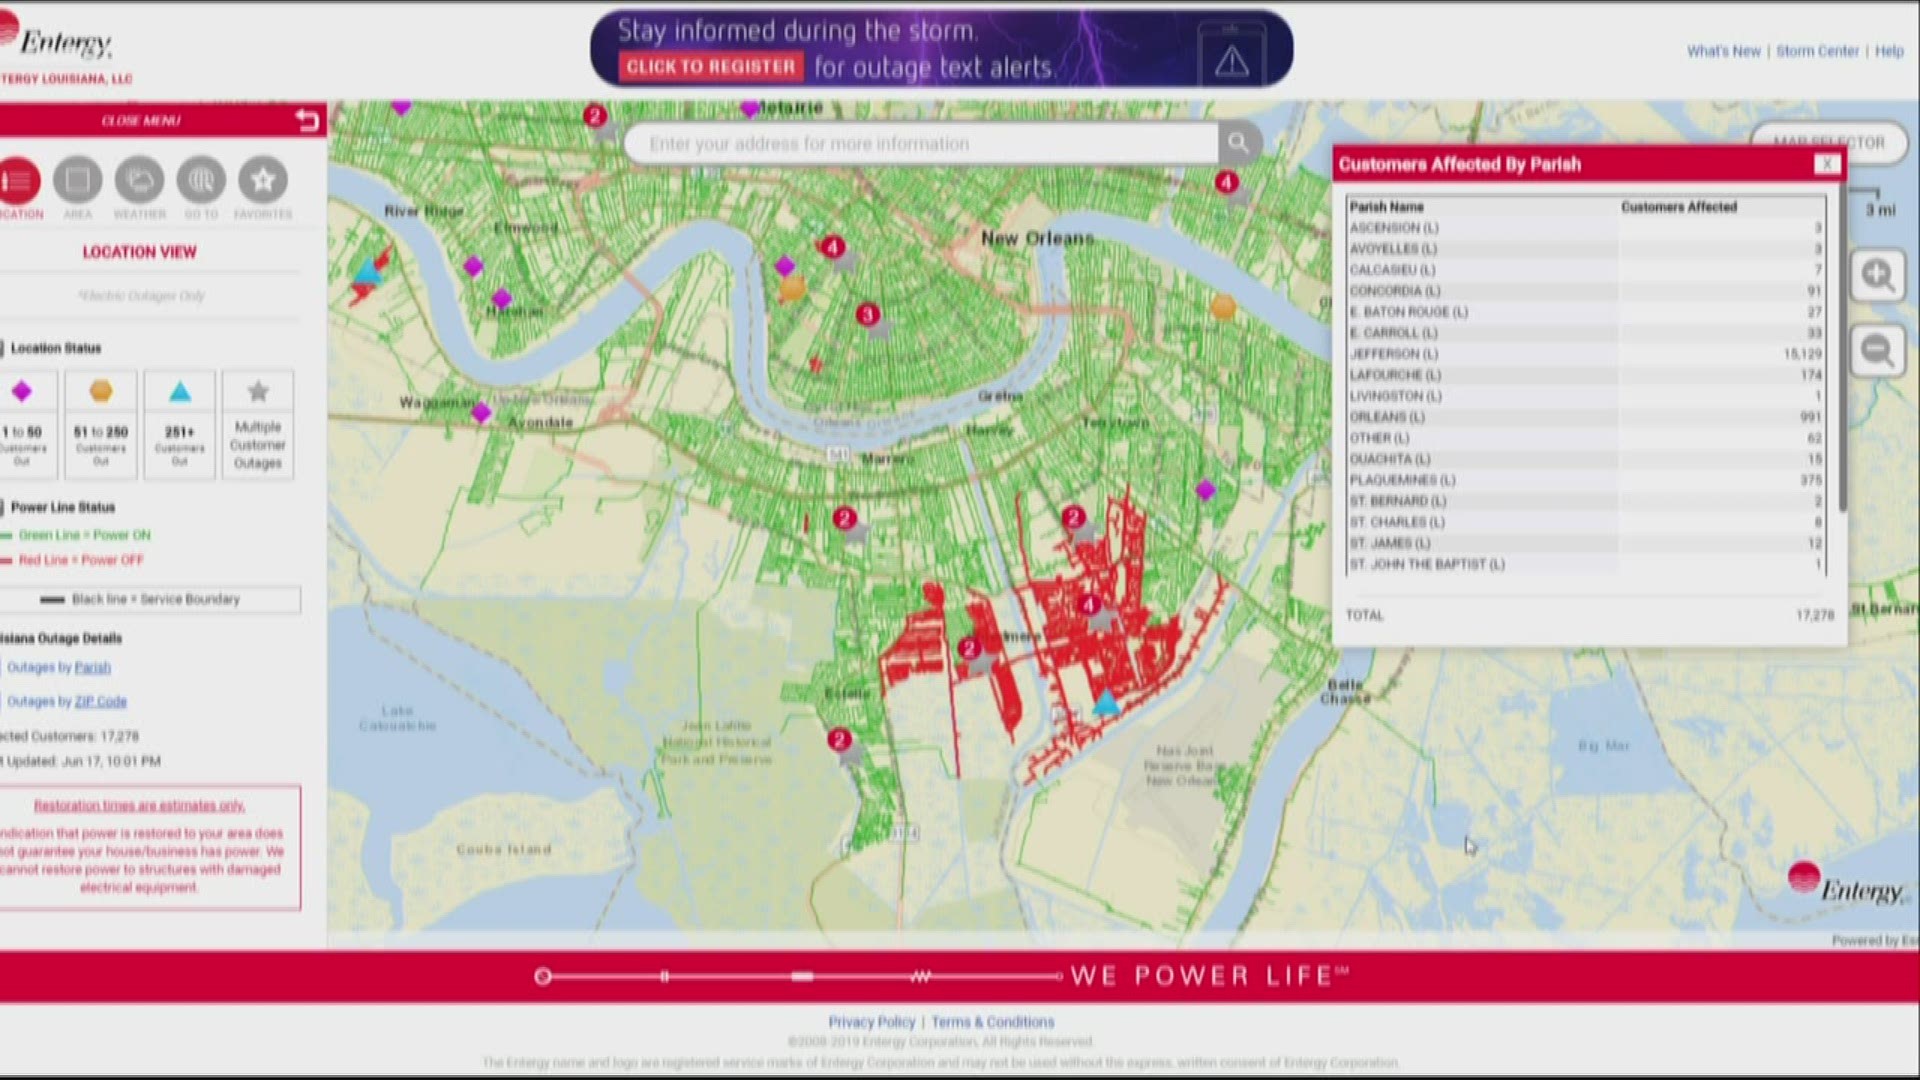 More than 17,900 Entergy customers in Jefferson Parish were without power as of 8:20 p.m. Monday, according to the utility's power outage map.